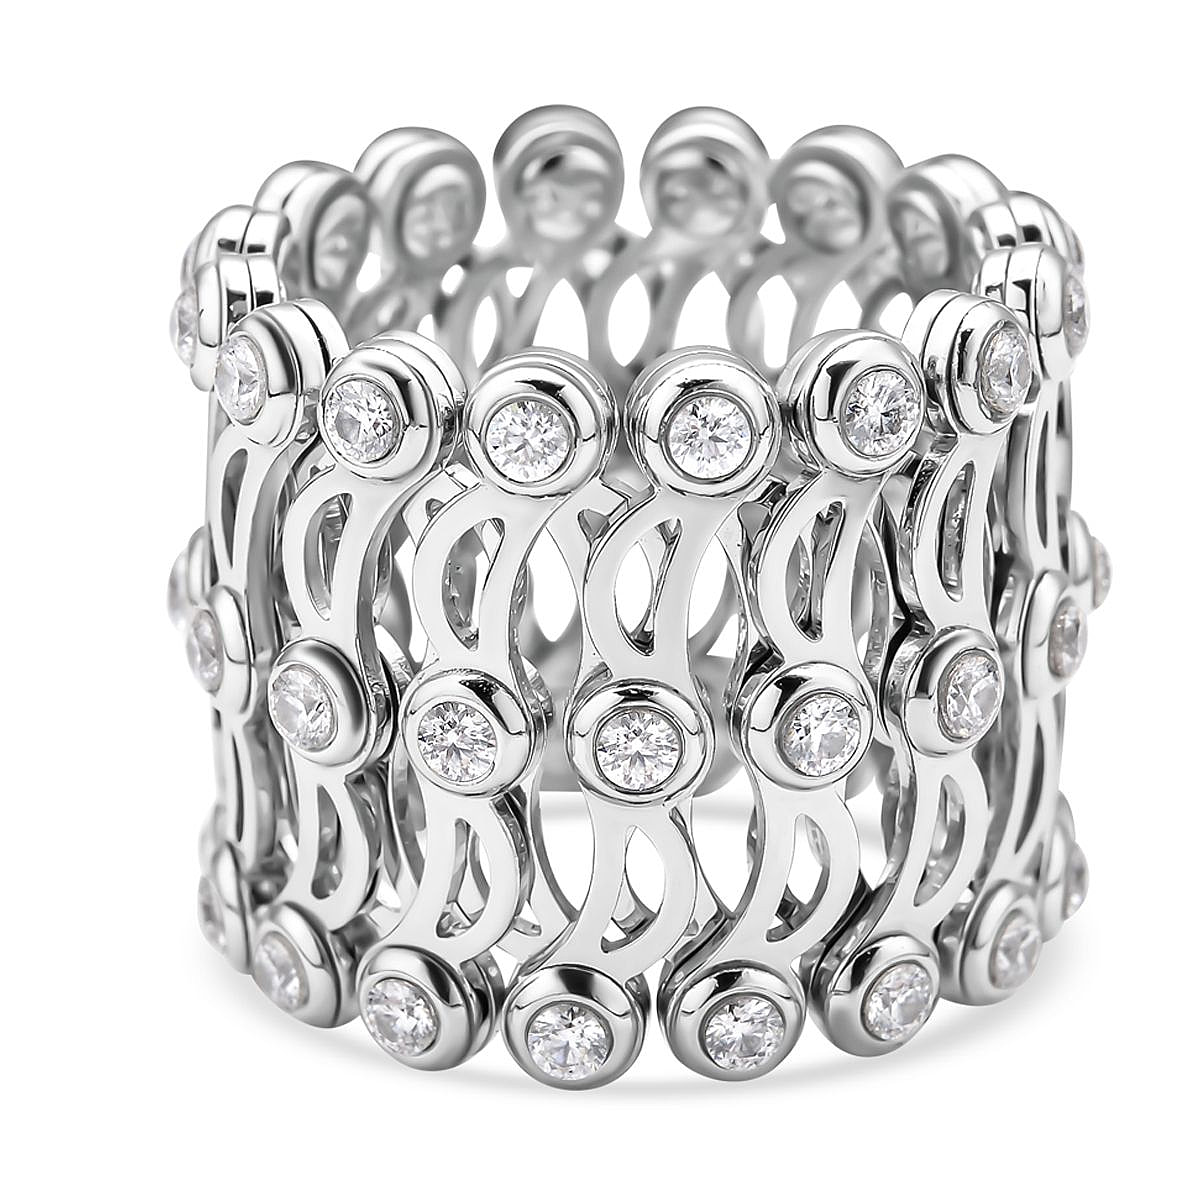 Concertina 2 in 1 Moissanite Adjustable Ring (L to Z) & Bangle (up to 7.5) in Rhodium Overlay Sterling Silver